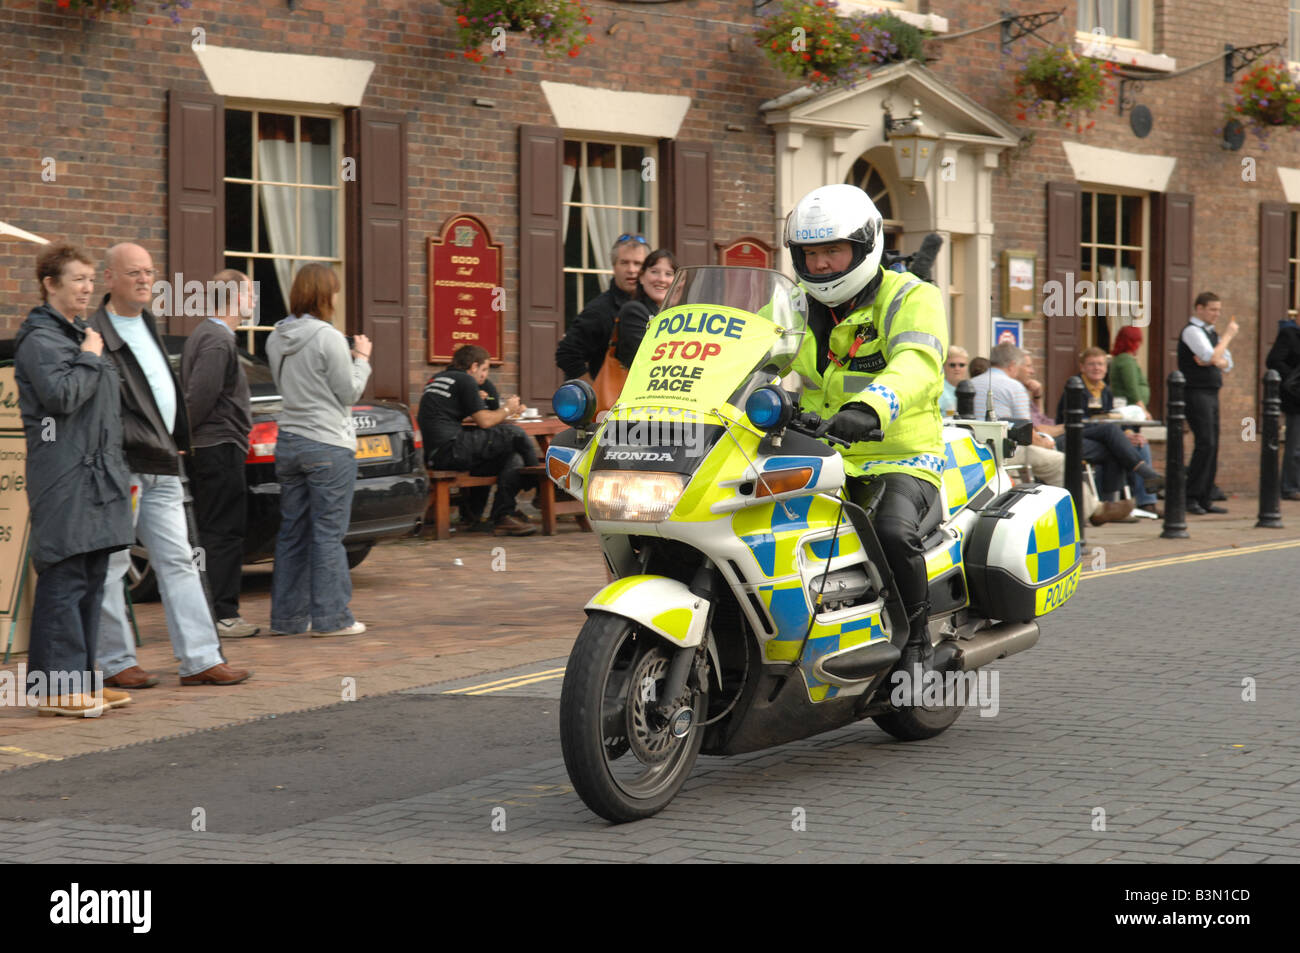 A police motorcyclist escorting the tour of Britain Cycle Race Stock Photo